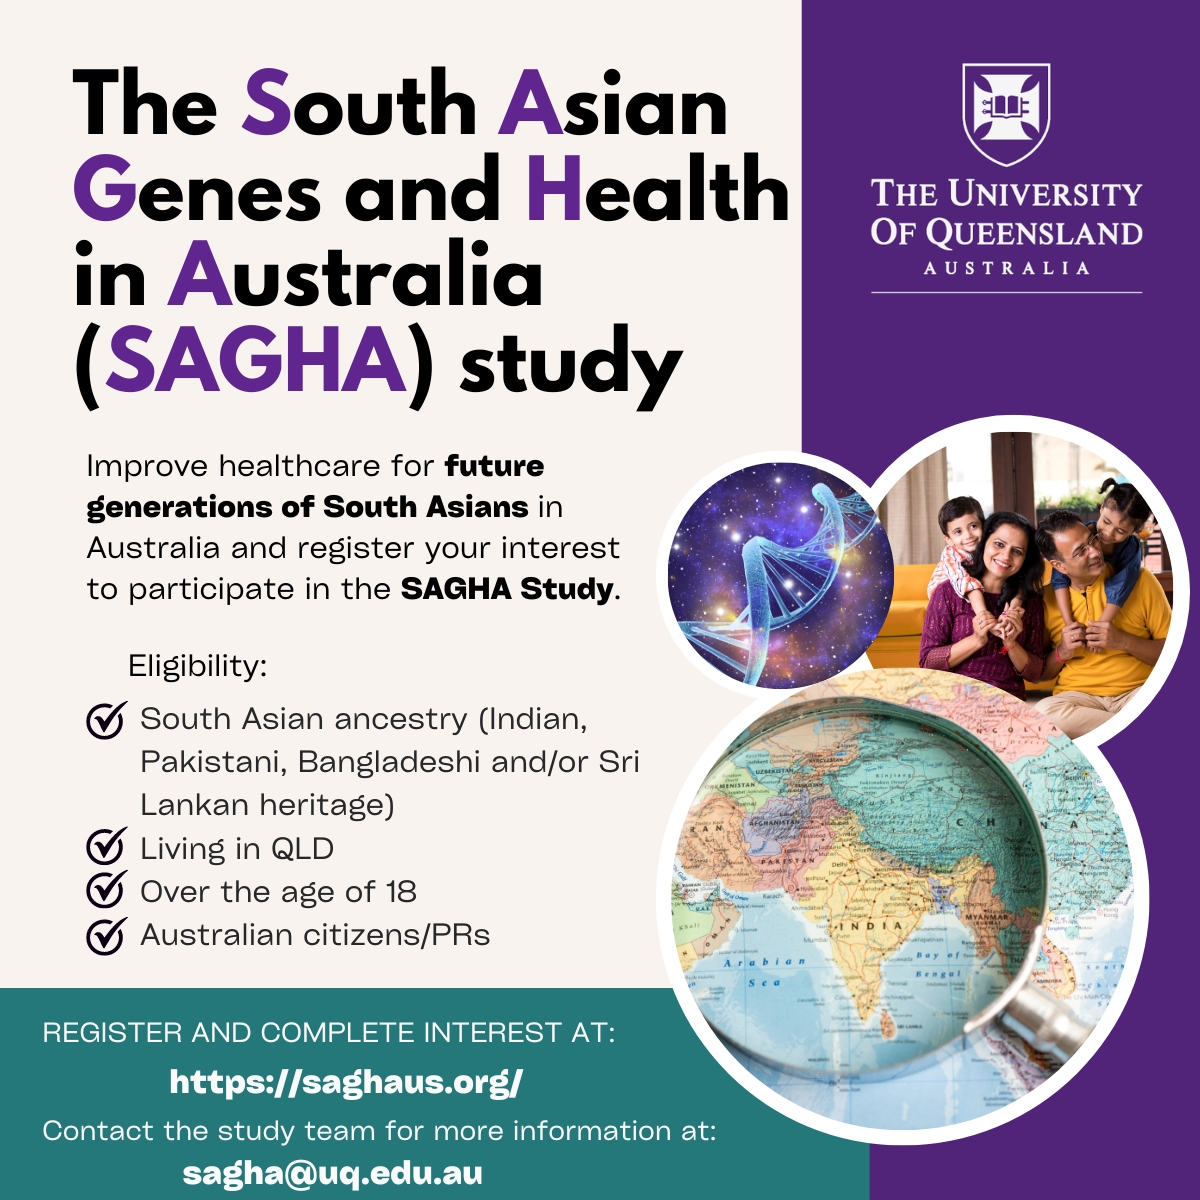 The South Asian Genes and Health in Australia (SAGHA) study is the first genomic study focused on the South Asian pop in Aus, is now open for recruitment! 👉 Head to loom.ly/aYyDE1s for more info and to register. An in-person event to be held 18th May @SpringfieldQLD.